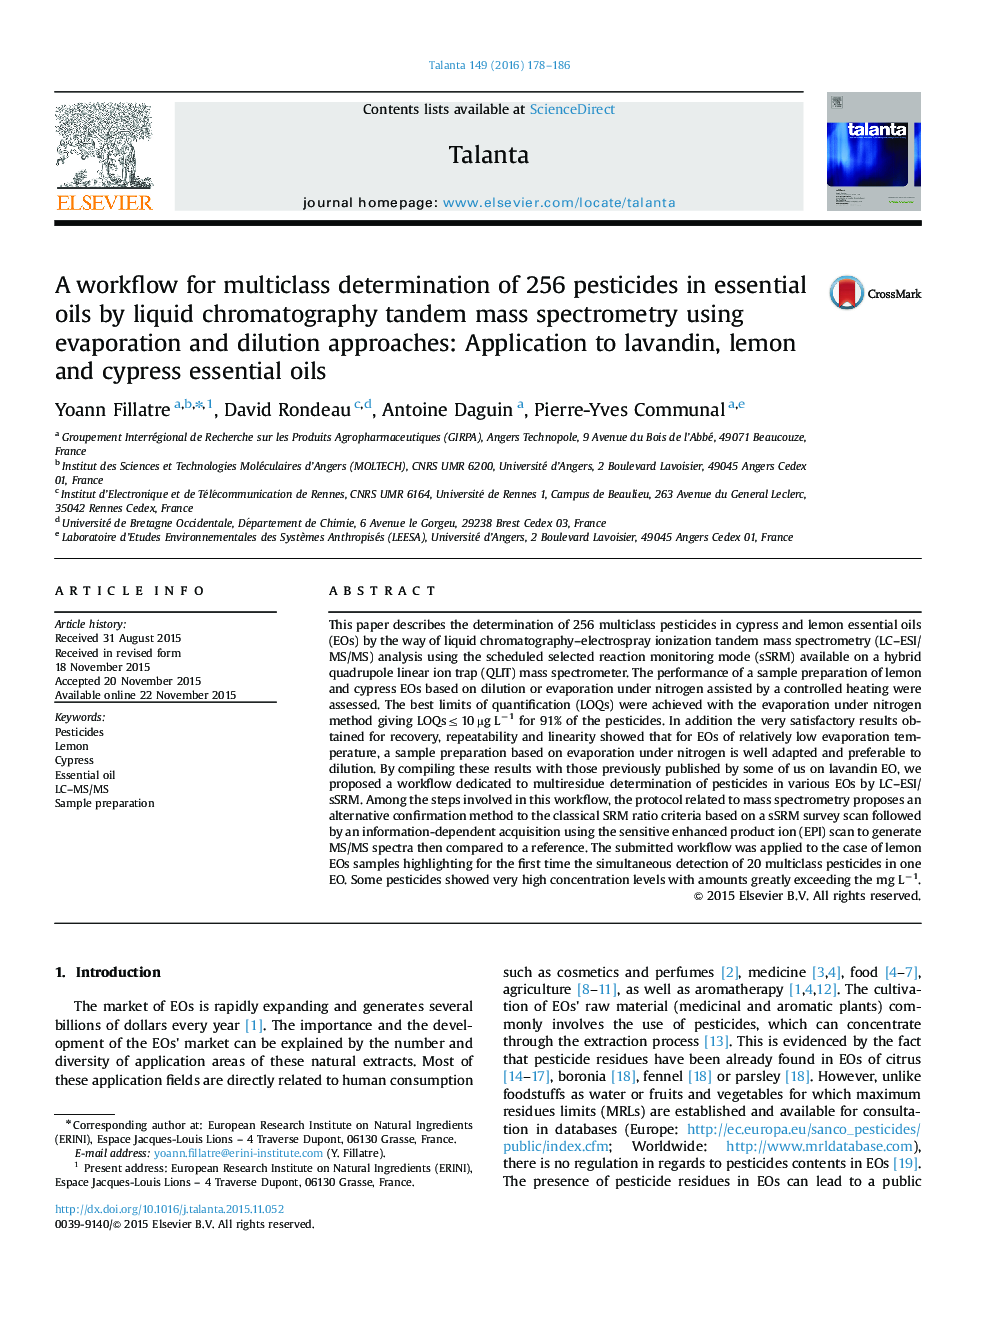 A workflow for multiclass determination of 256 pesticides in essential oils by liquid chromatography tandem mass spectrometry using evaporation and dilution approaches: Application to lavandin, lemon and cypress essential oils